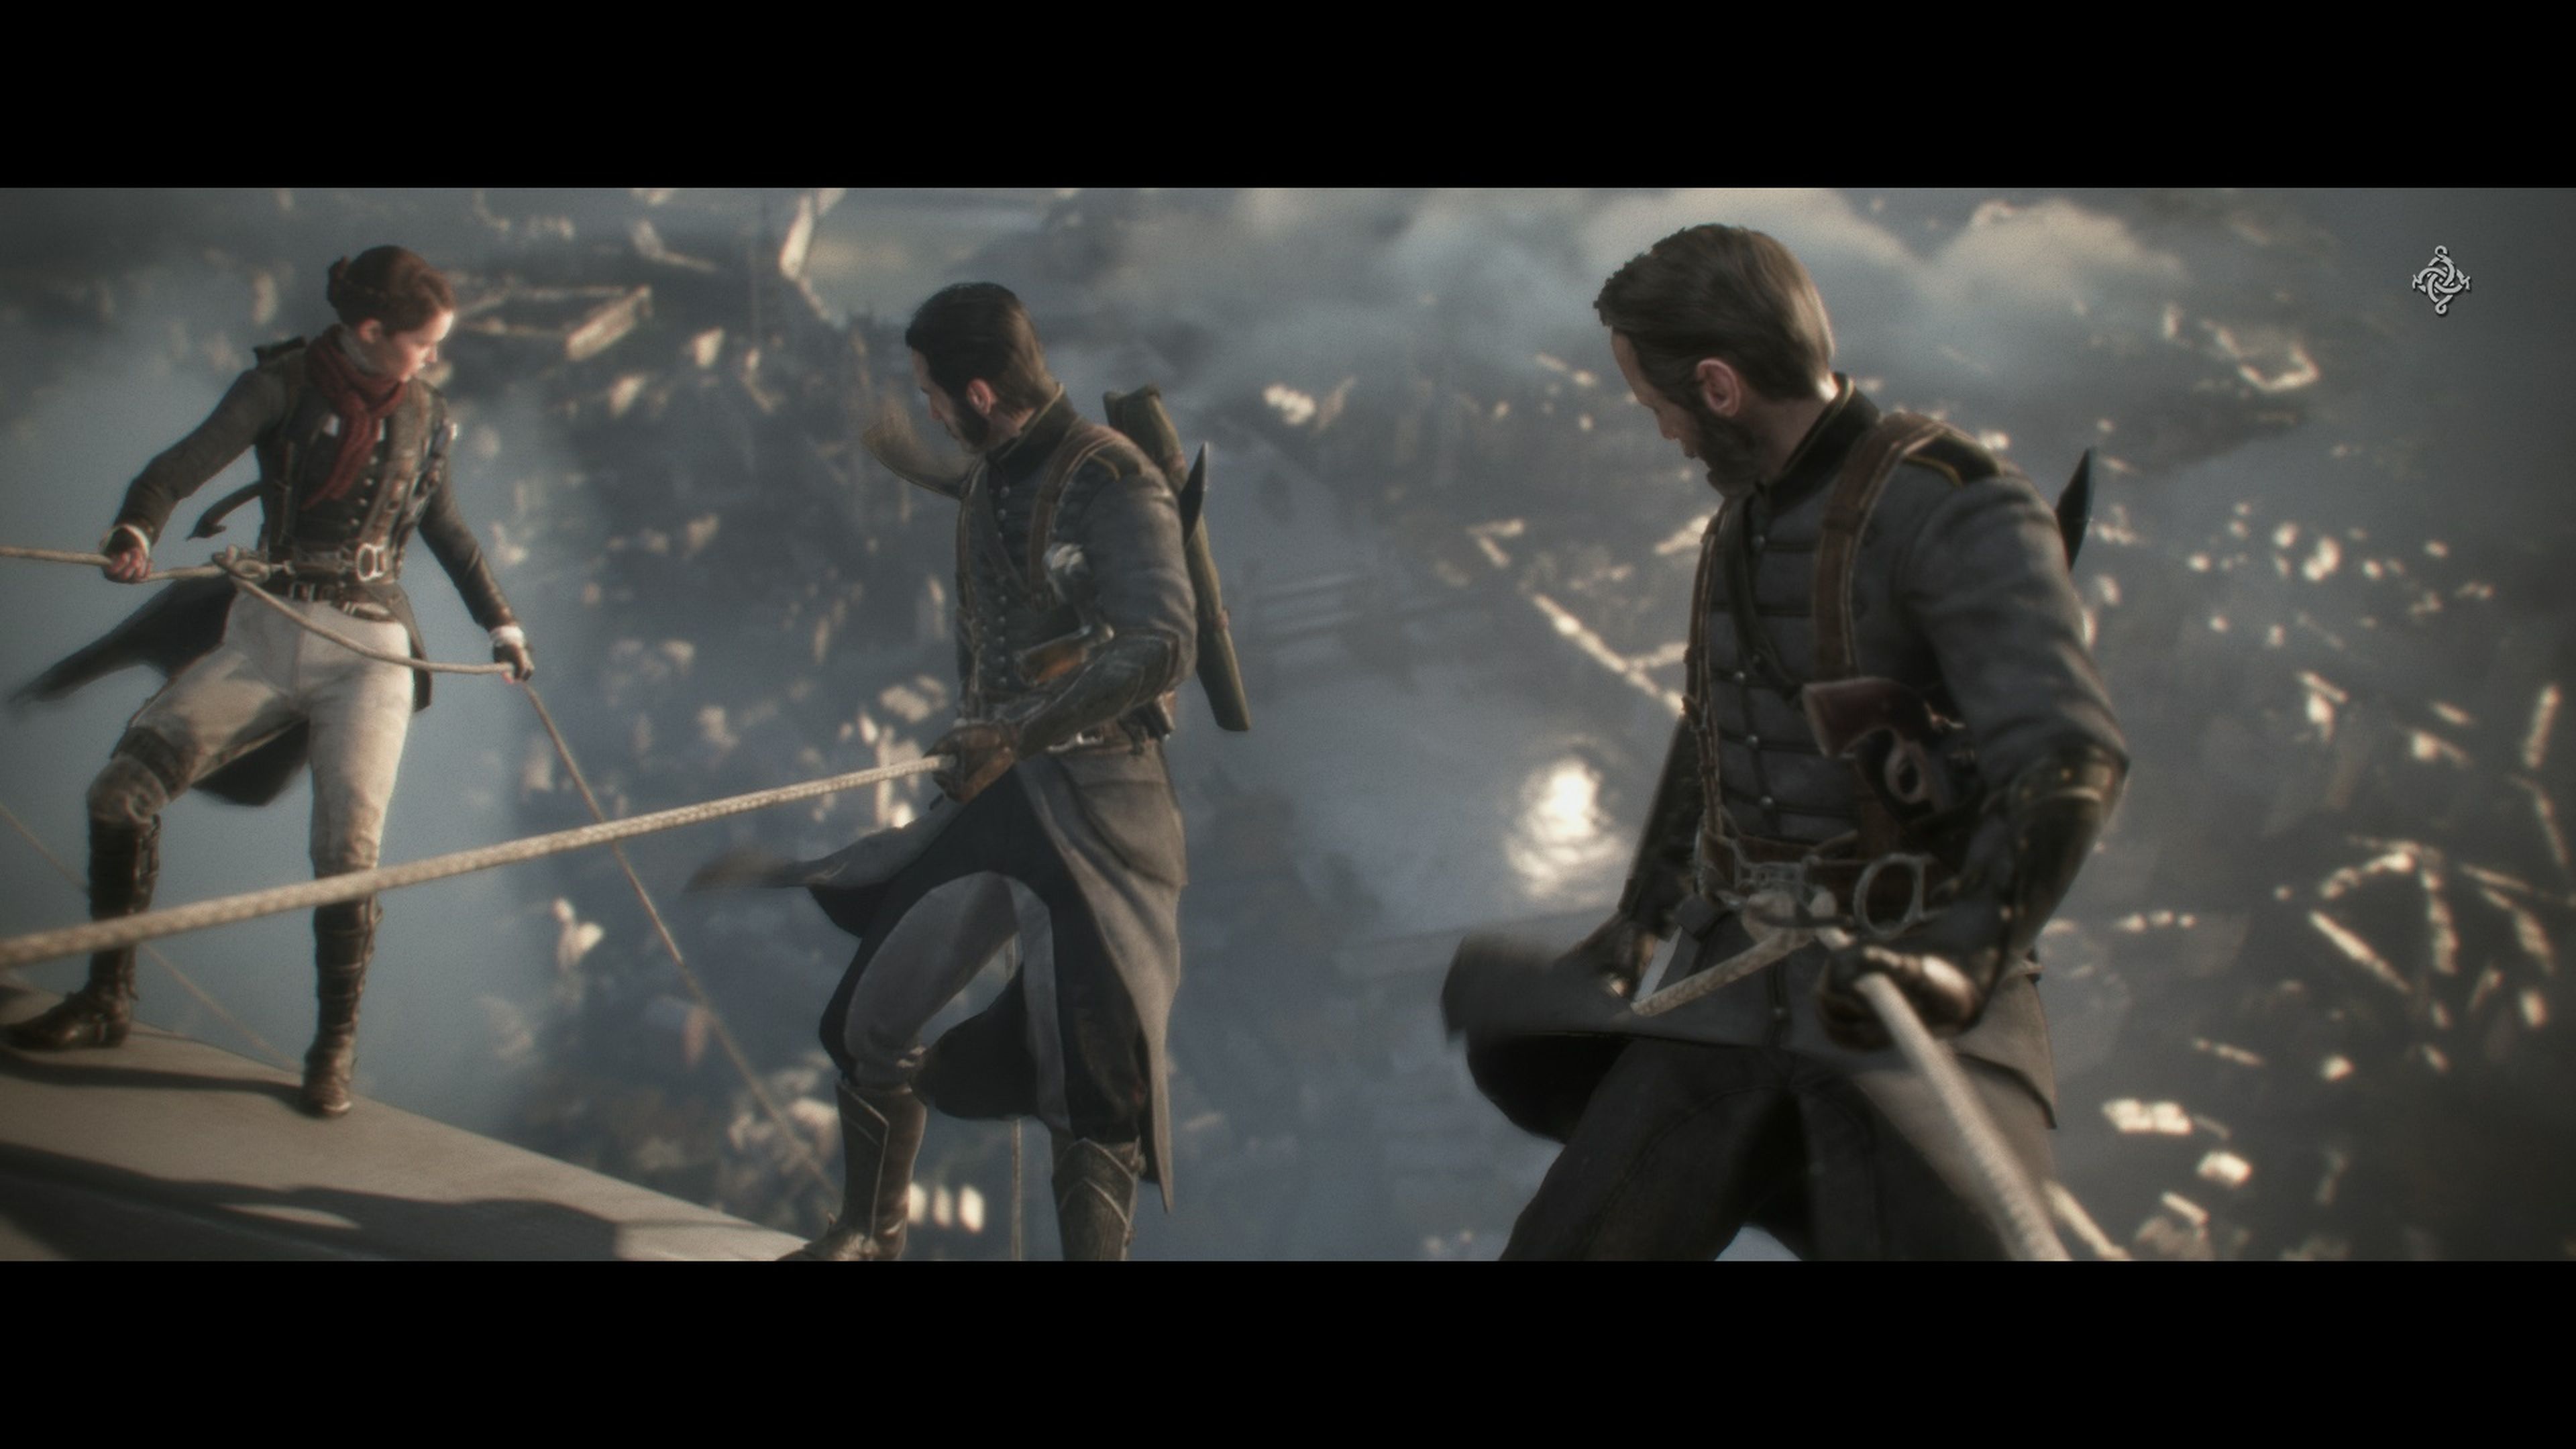 PlayStation Experience: Avance de The Order 1886